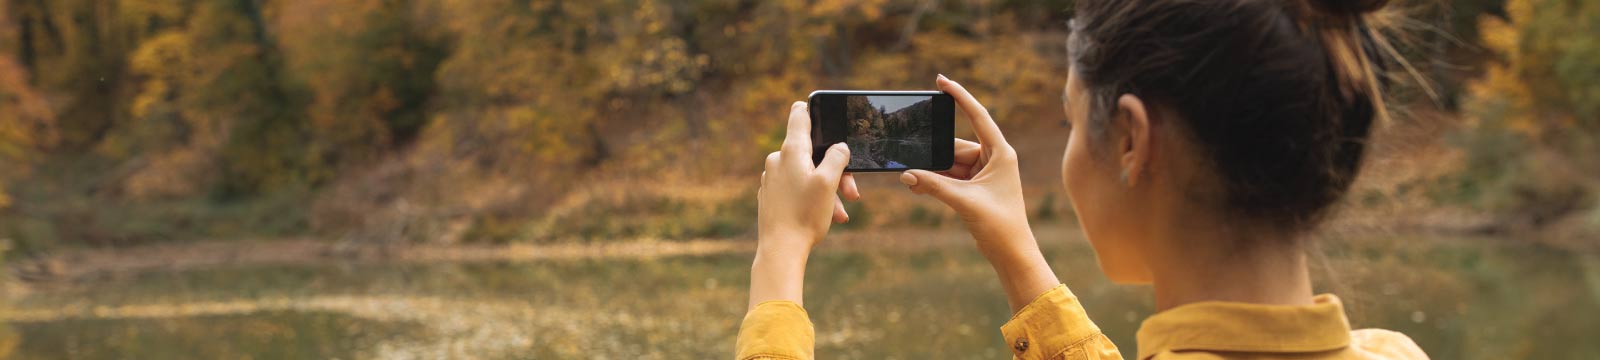 Girl Taking a Photo with a Mobile Phone in the Fall